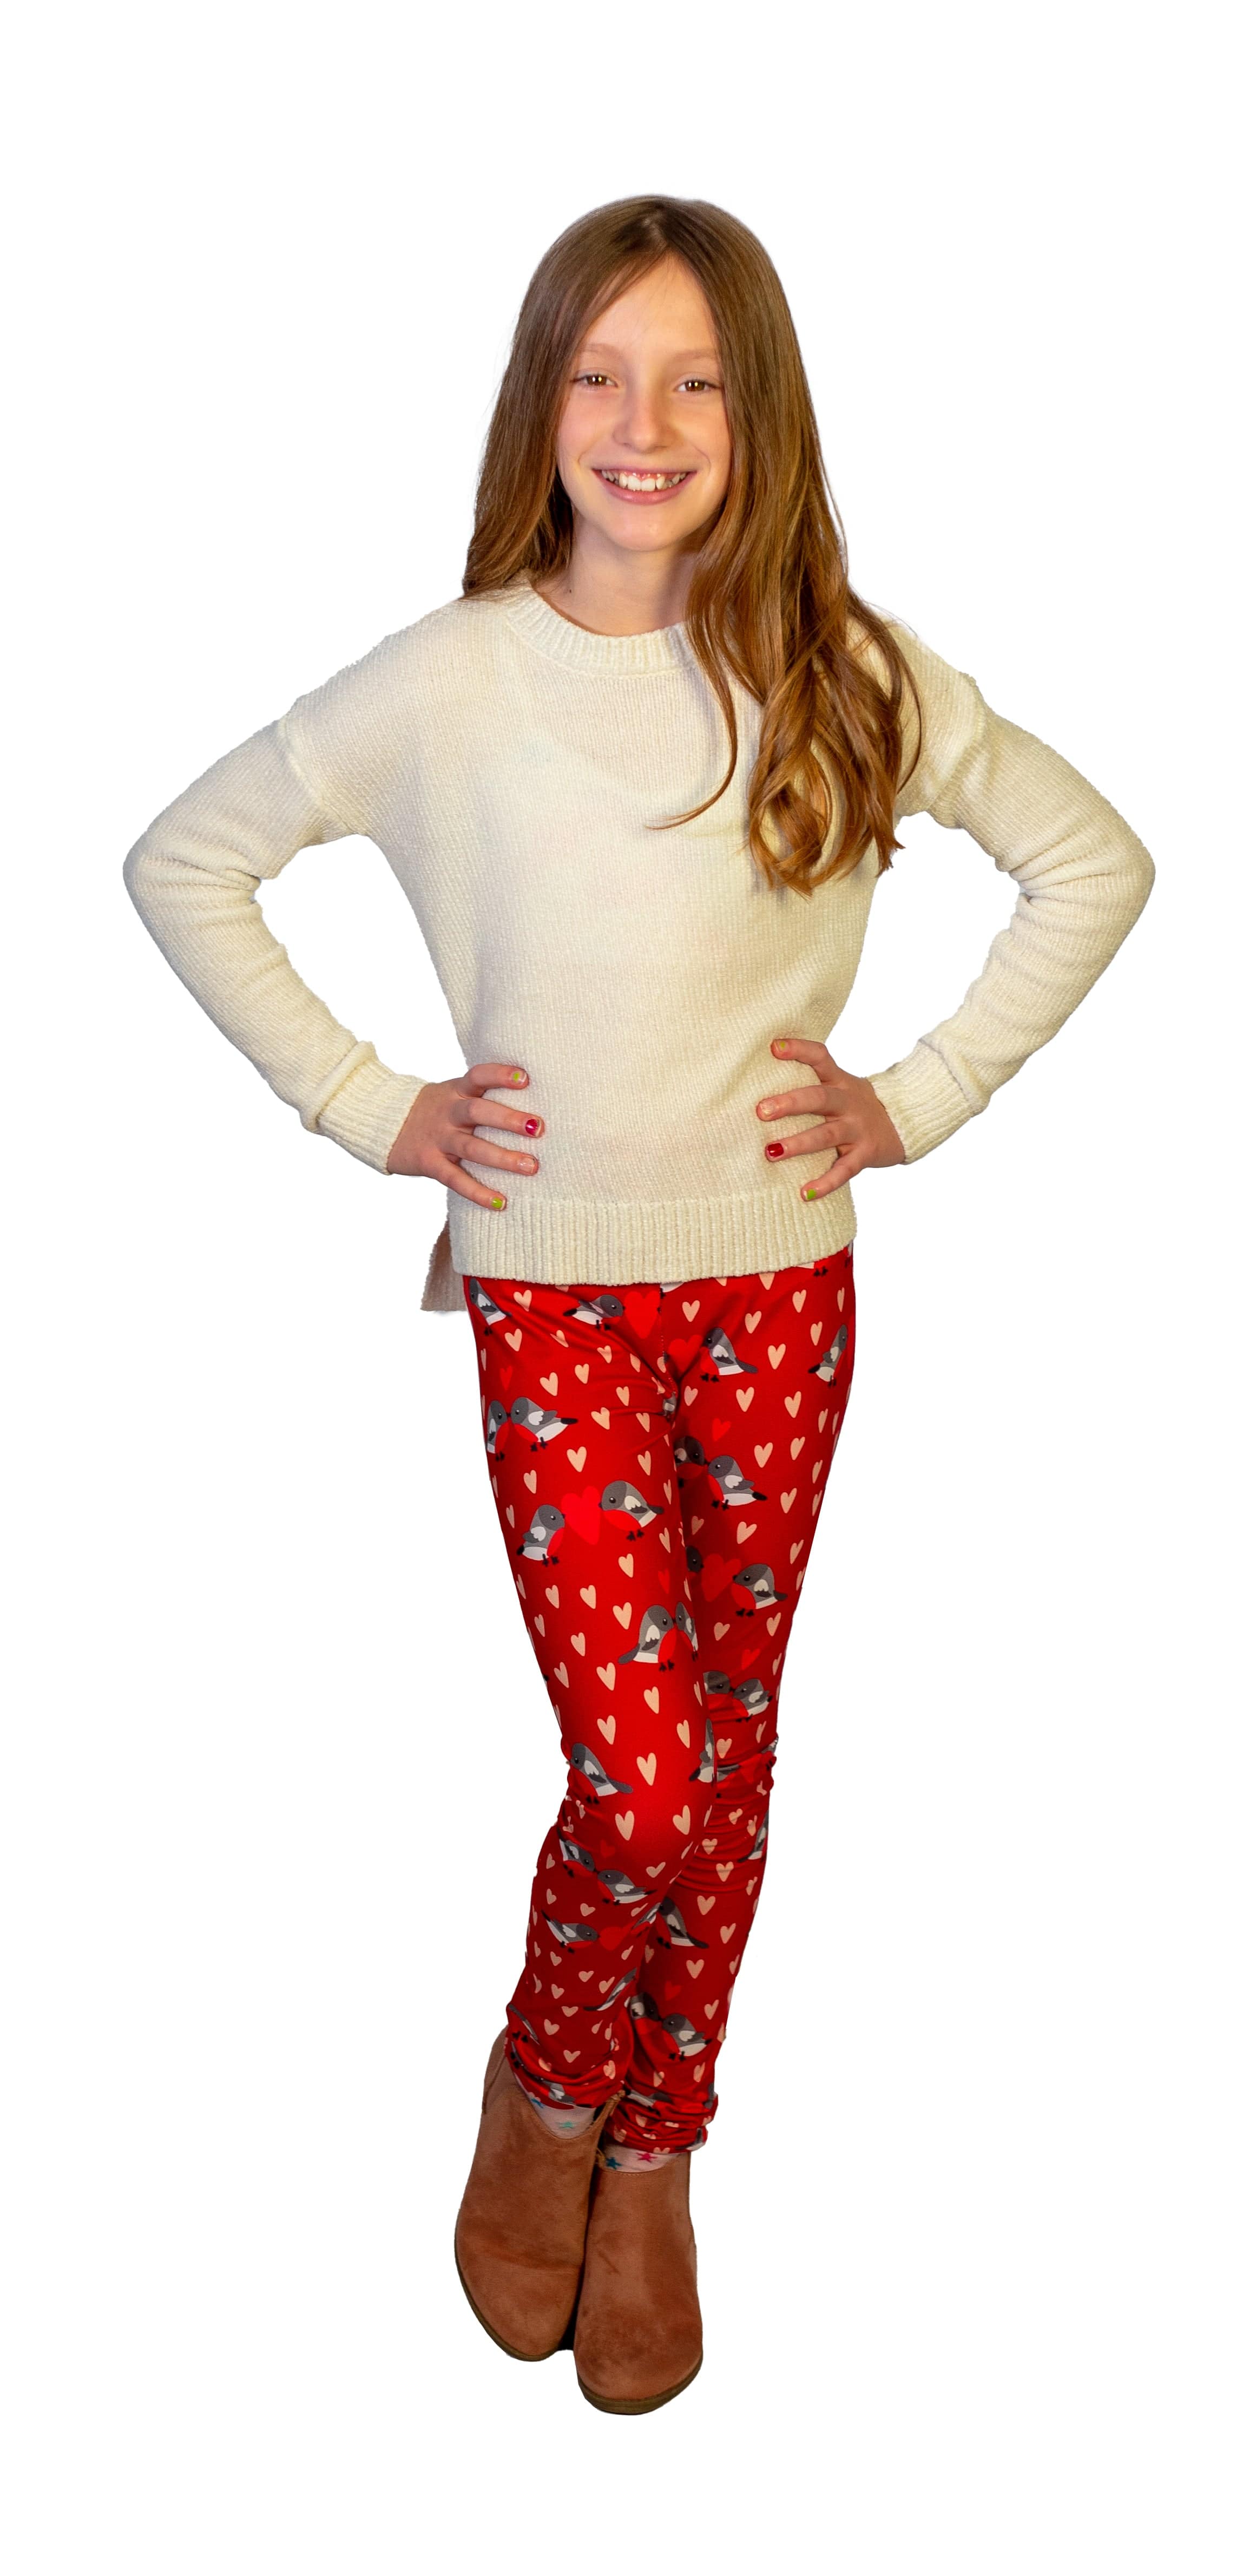 Great Lakes Kids Apparel - ❄Our new snowflake leggings will be available  tonight!! These ones have limited stock!!❄ #greatlakeskidsapparel  #shopsmall #smallbuisness #mompreneur #shoplocal #clebusiness #kidsboutique  #leggings #winter #snowflakes